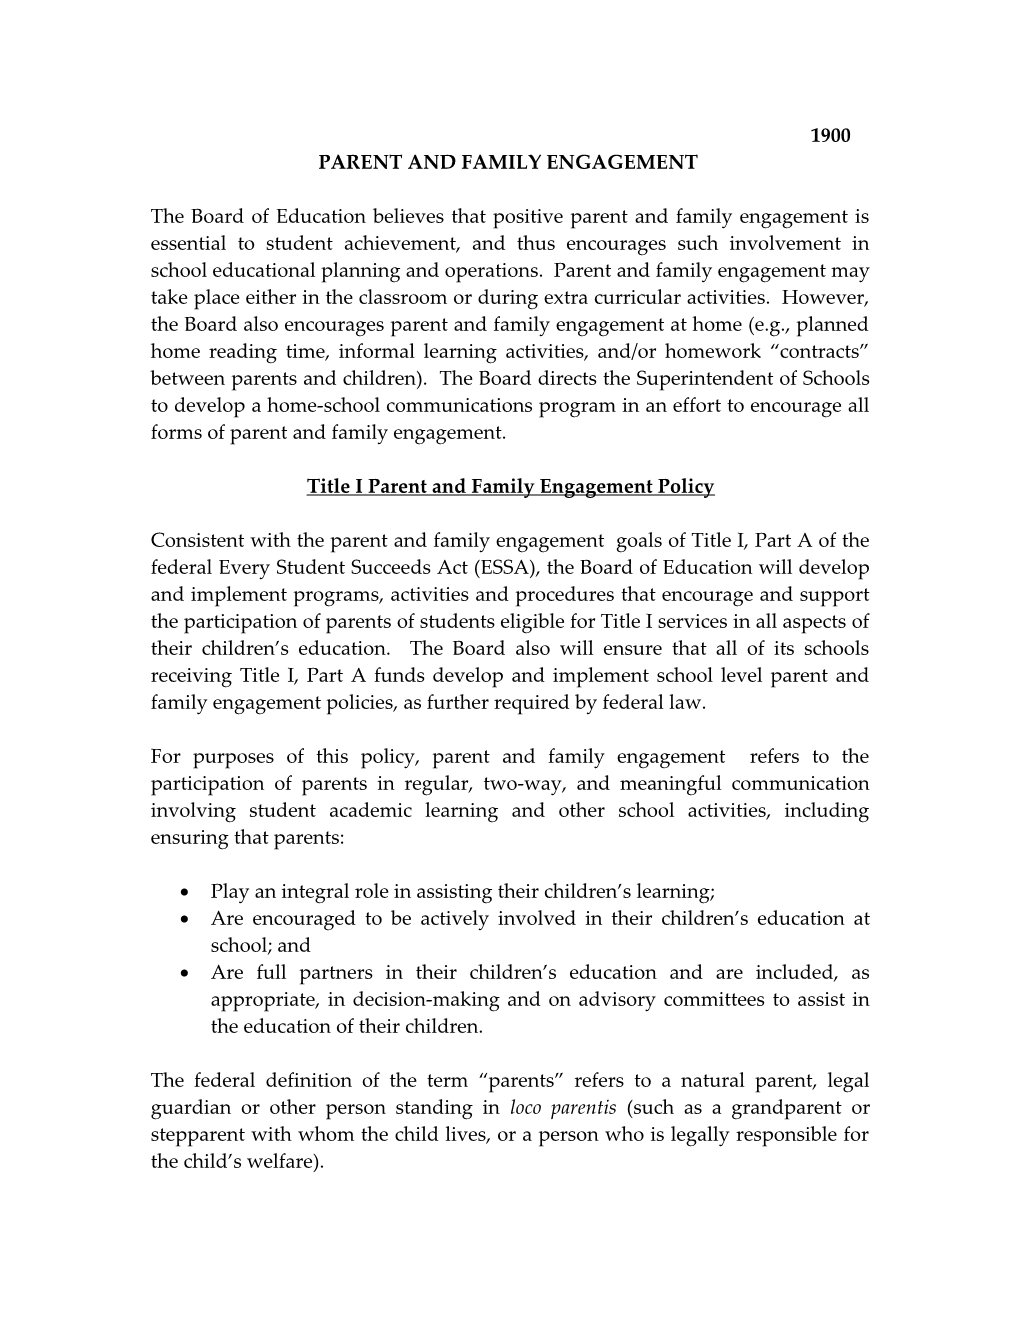 Parent and Family Engagement